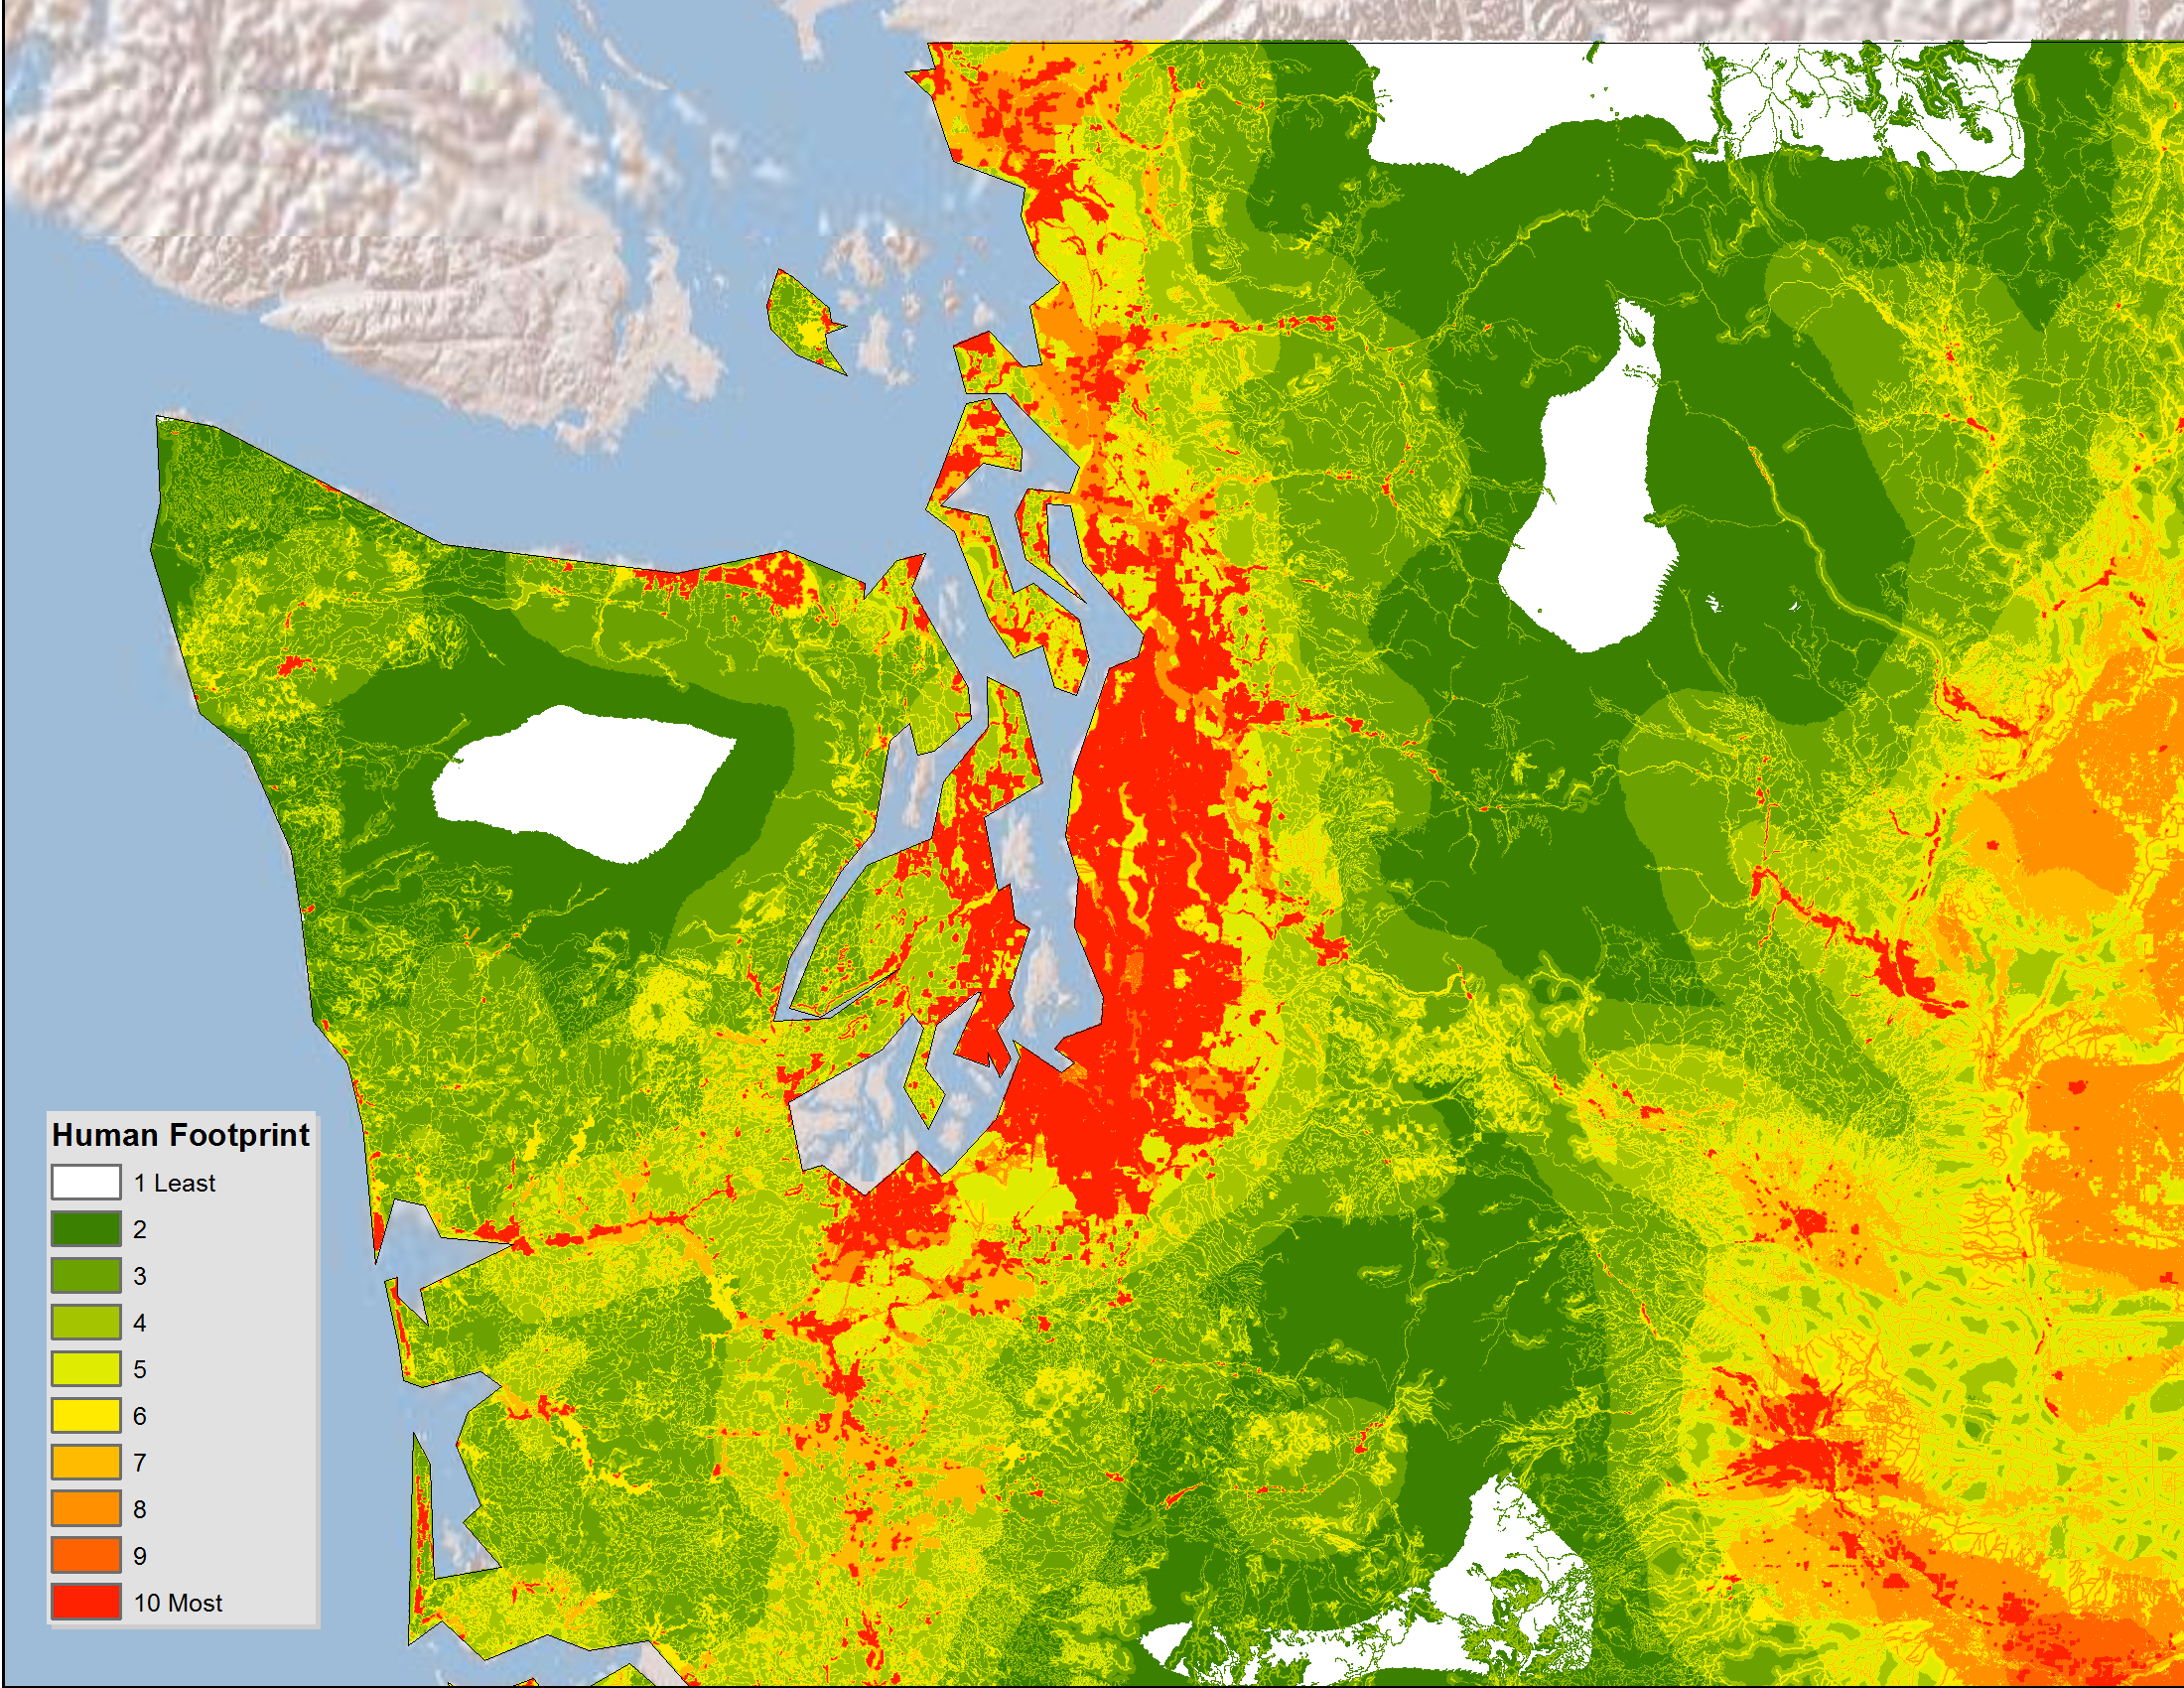 Human footprint maps of Western states and cities